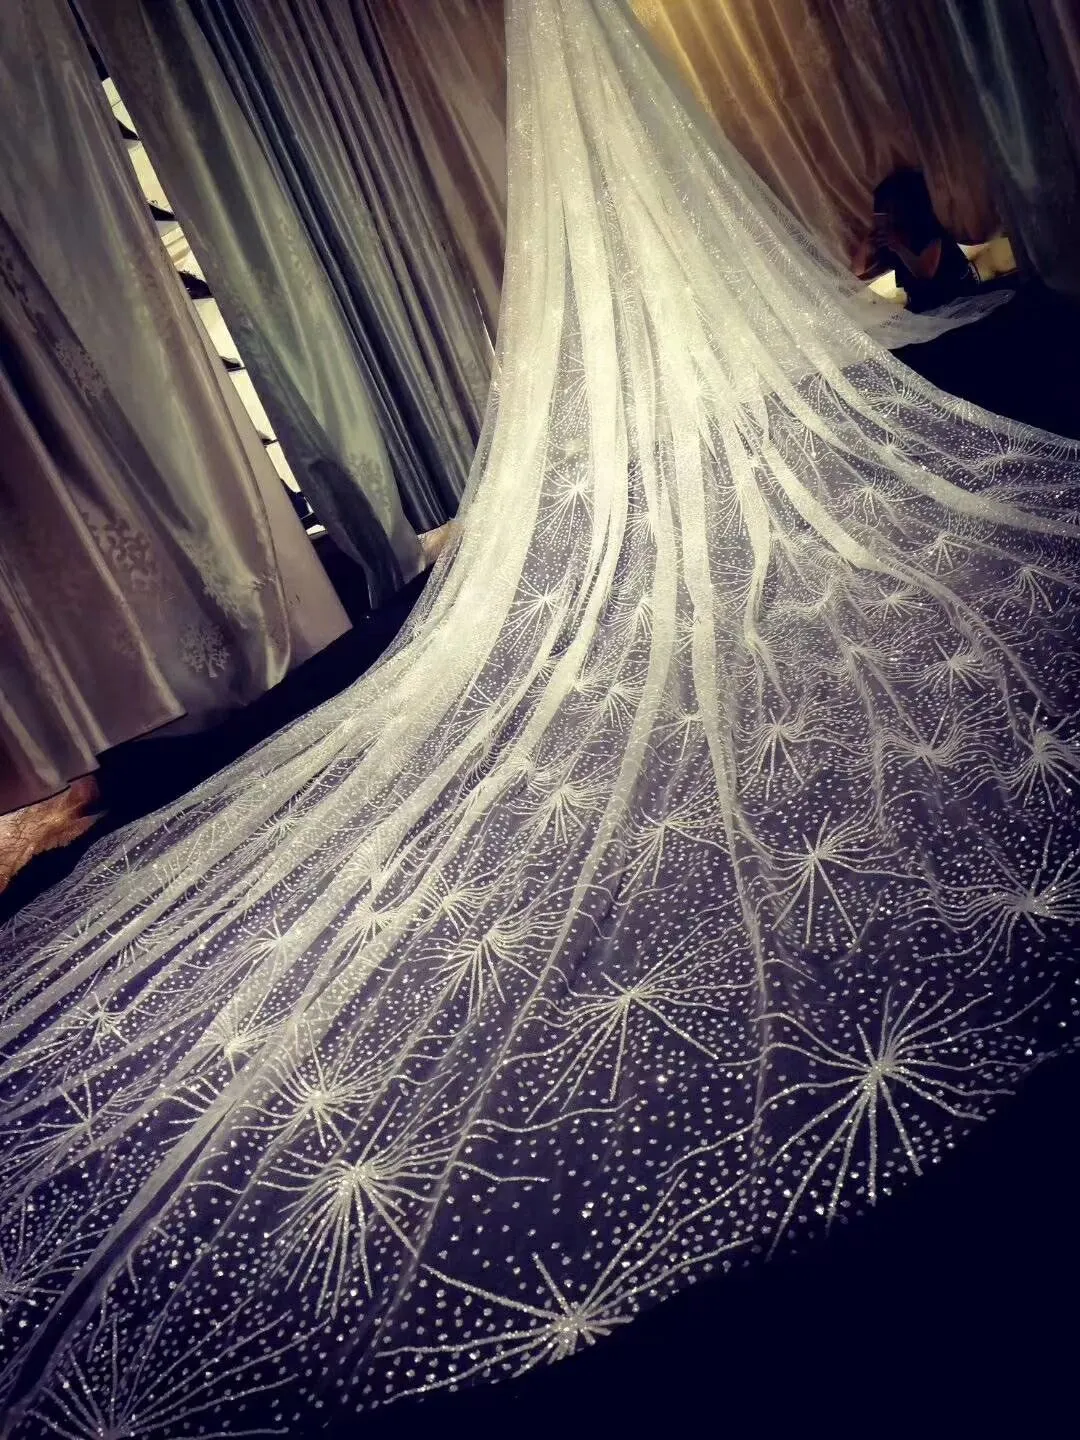 2019 Sparkly Bling Bling Bridal Veil Cathedral Train 3 METERS Luxury Shiny Wedding Party Bridal Veil White Champagne292K